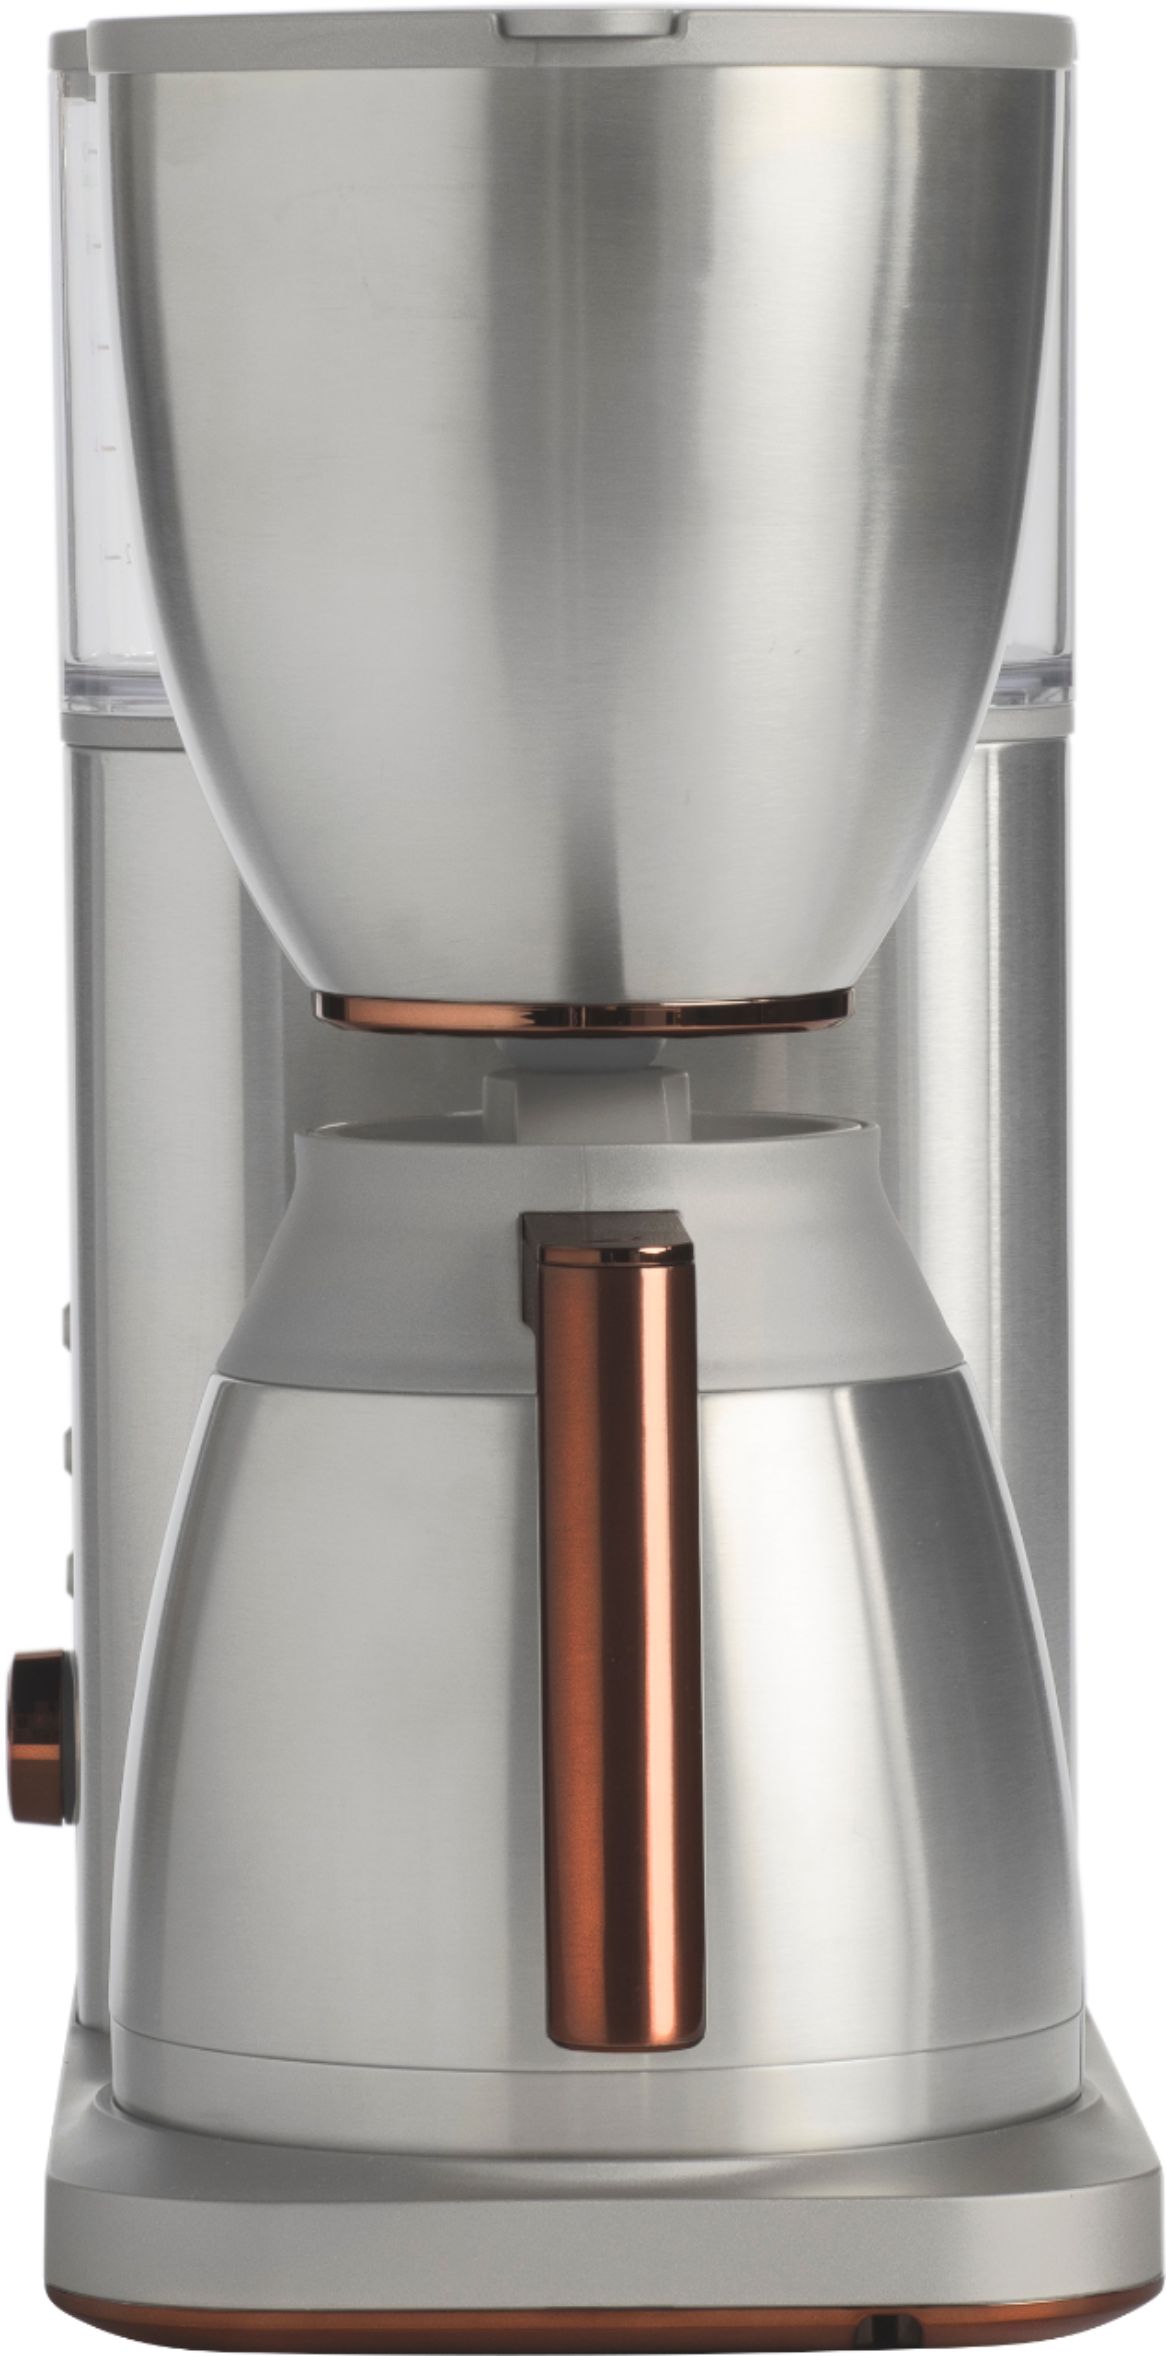 Café Smart Drip 10-Cup Coffee Maker with WiFi Stainless Steel C7CDABS2RS3 -  Best Buy